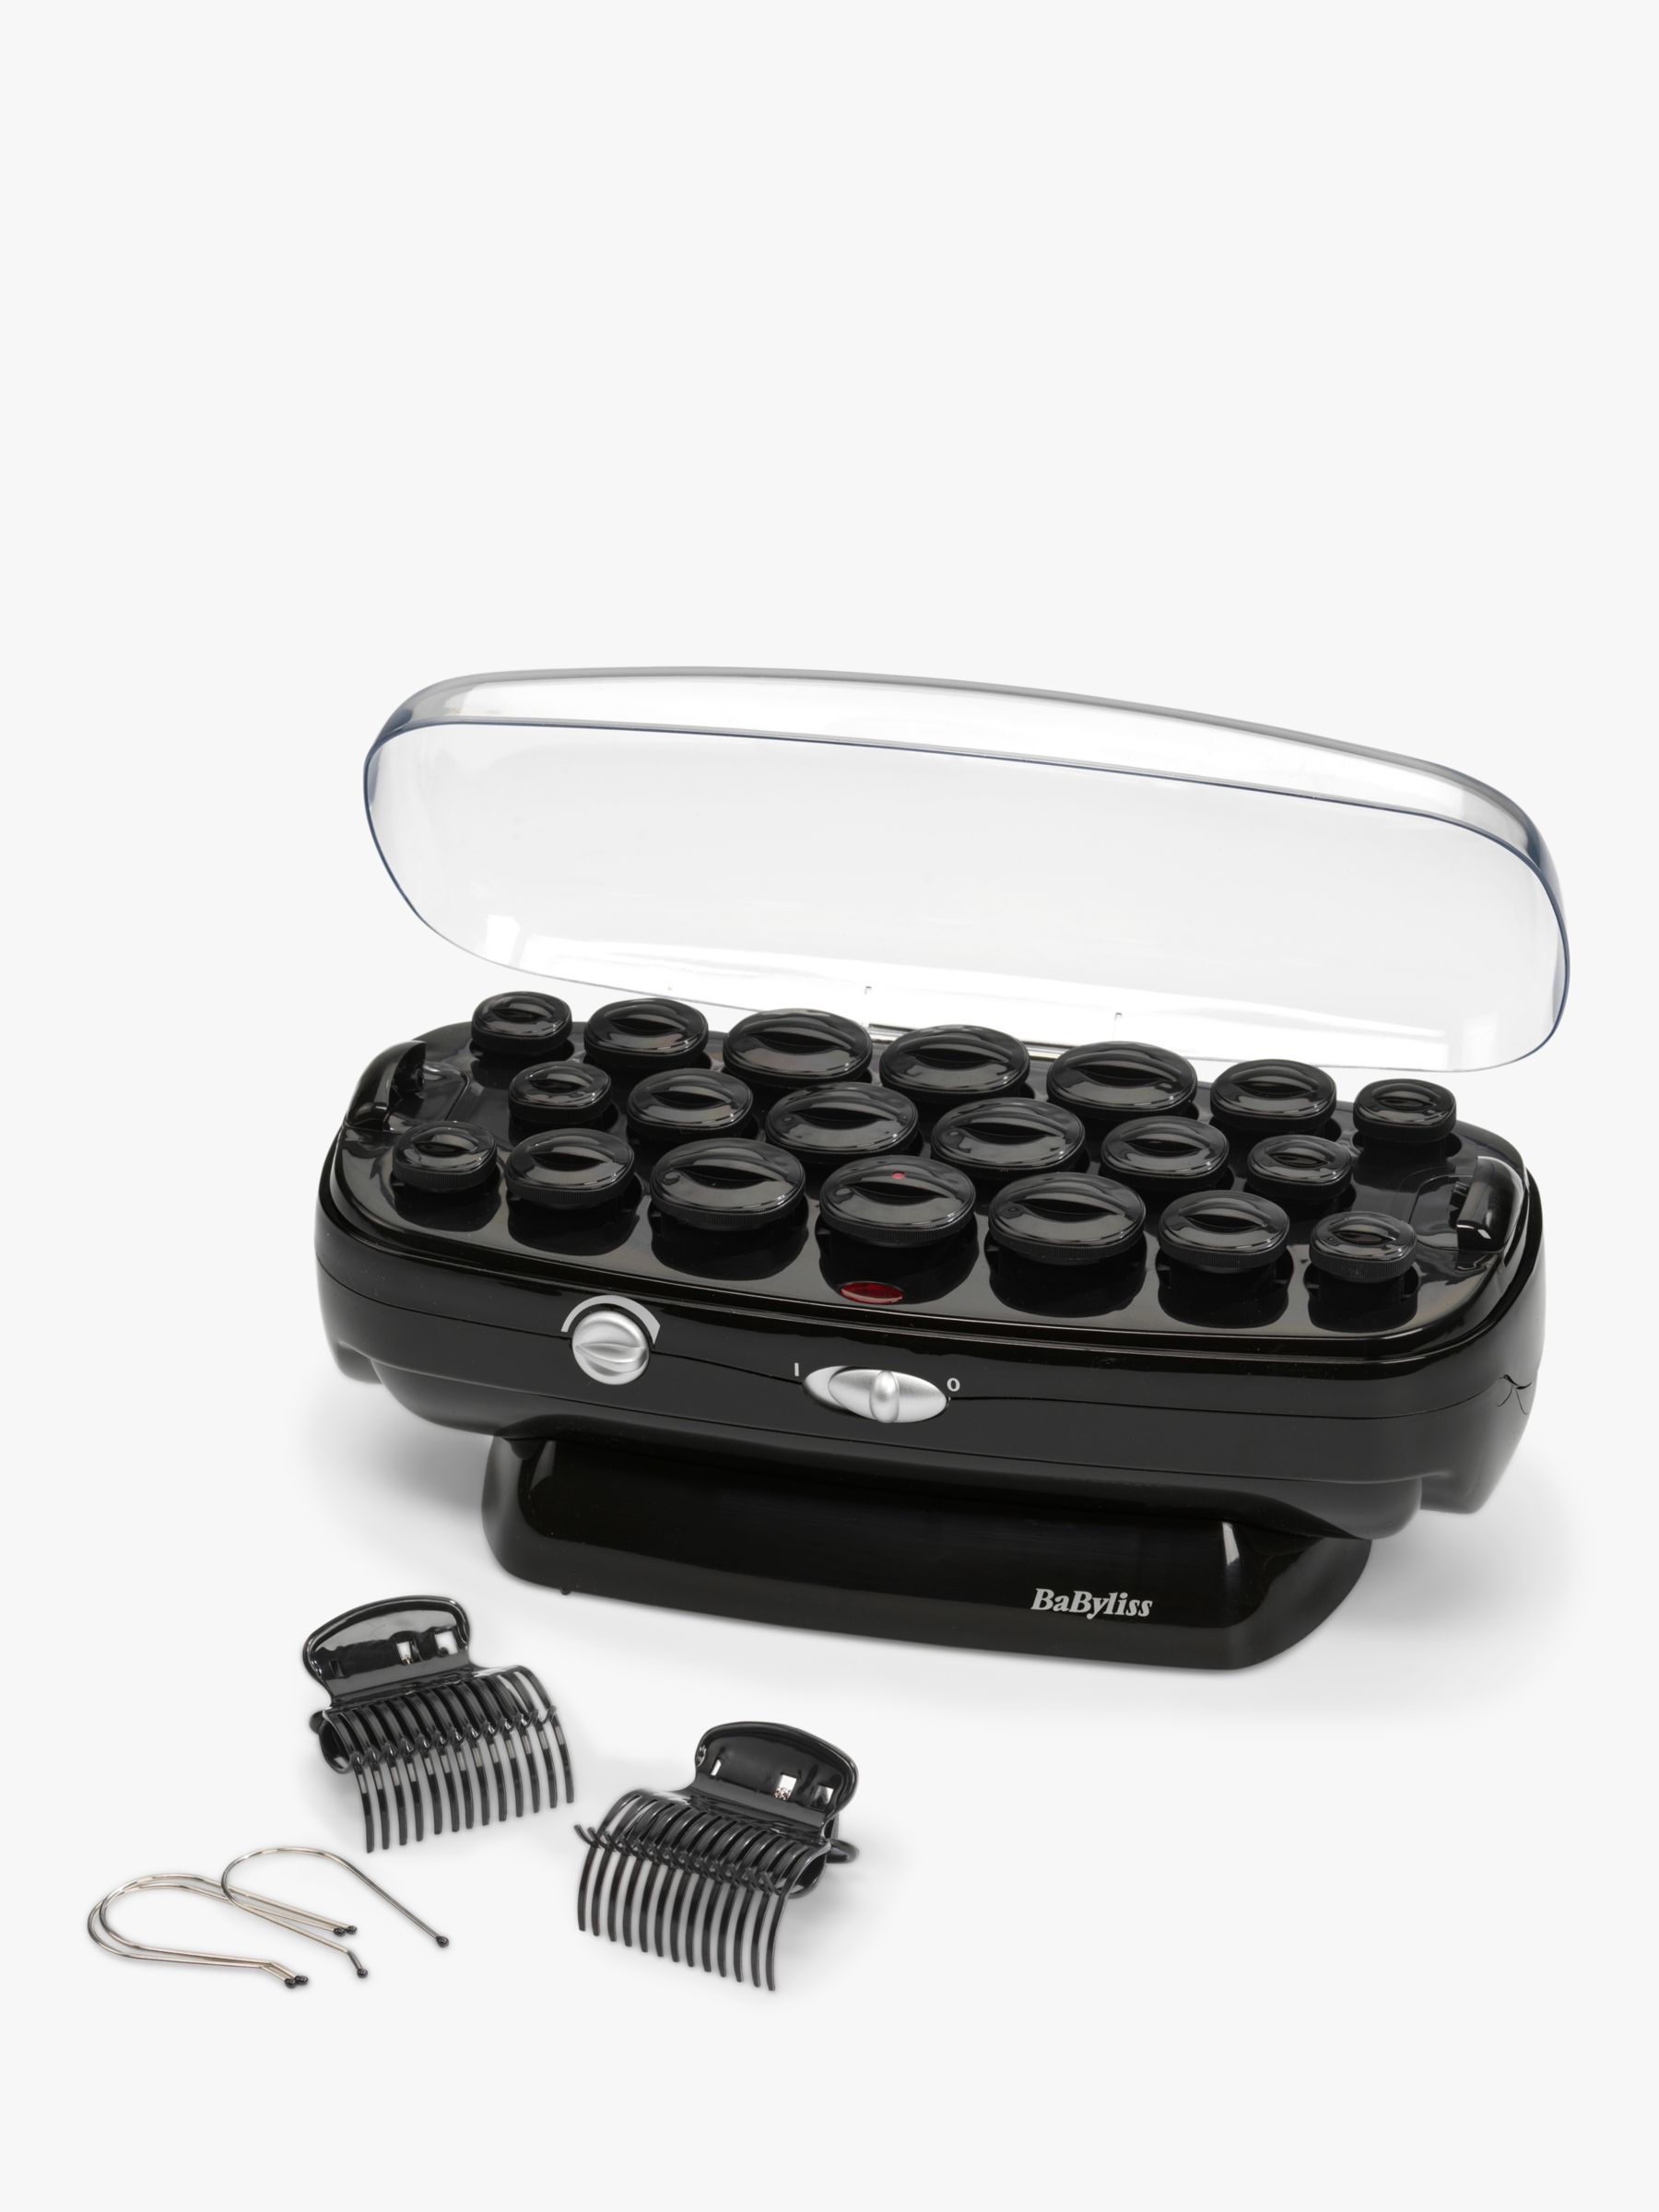 BaByliss 3035U Thermo-Ceramic Rollers, Black